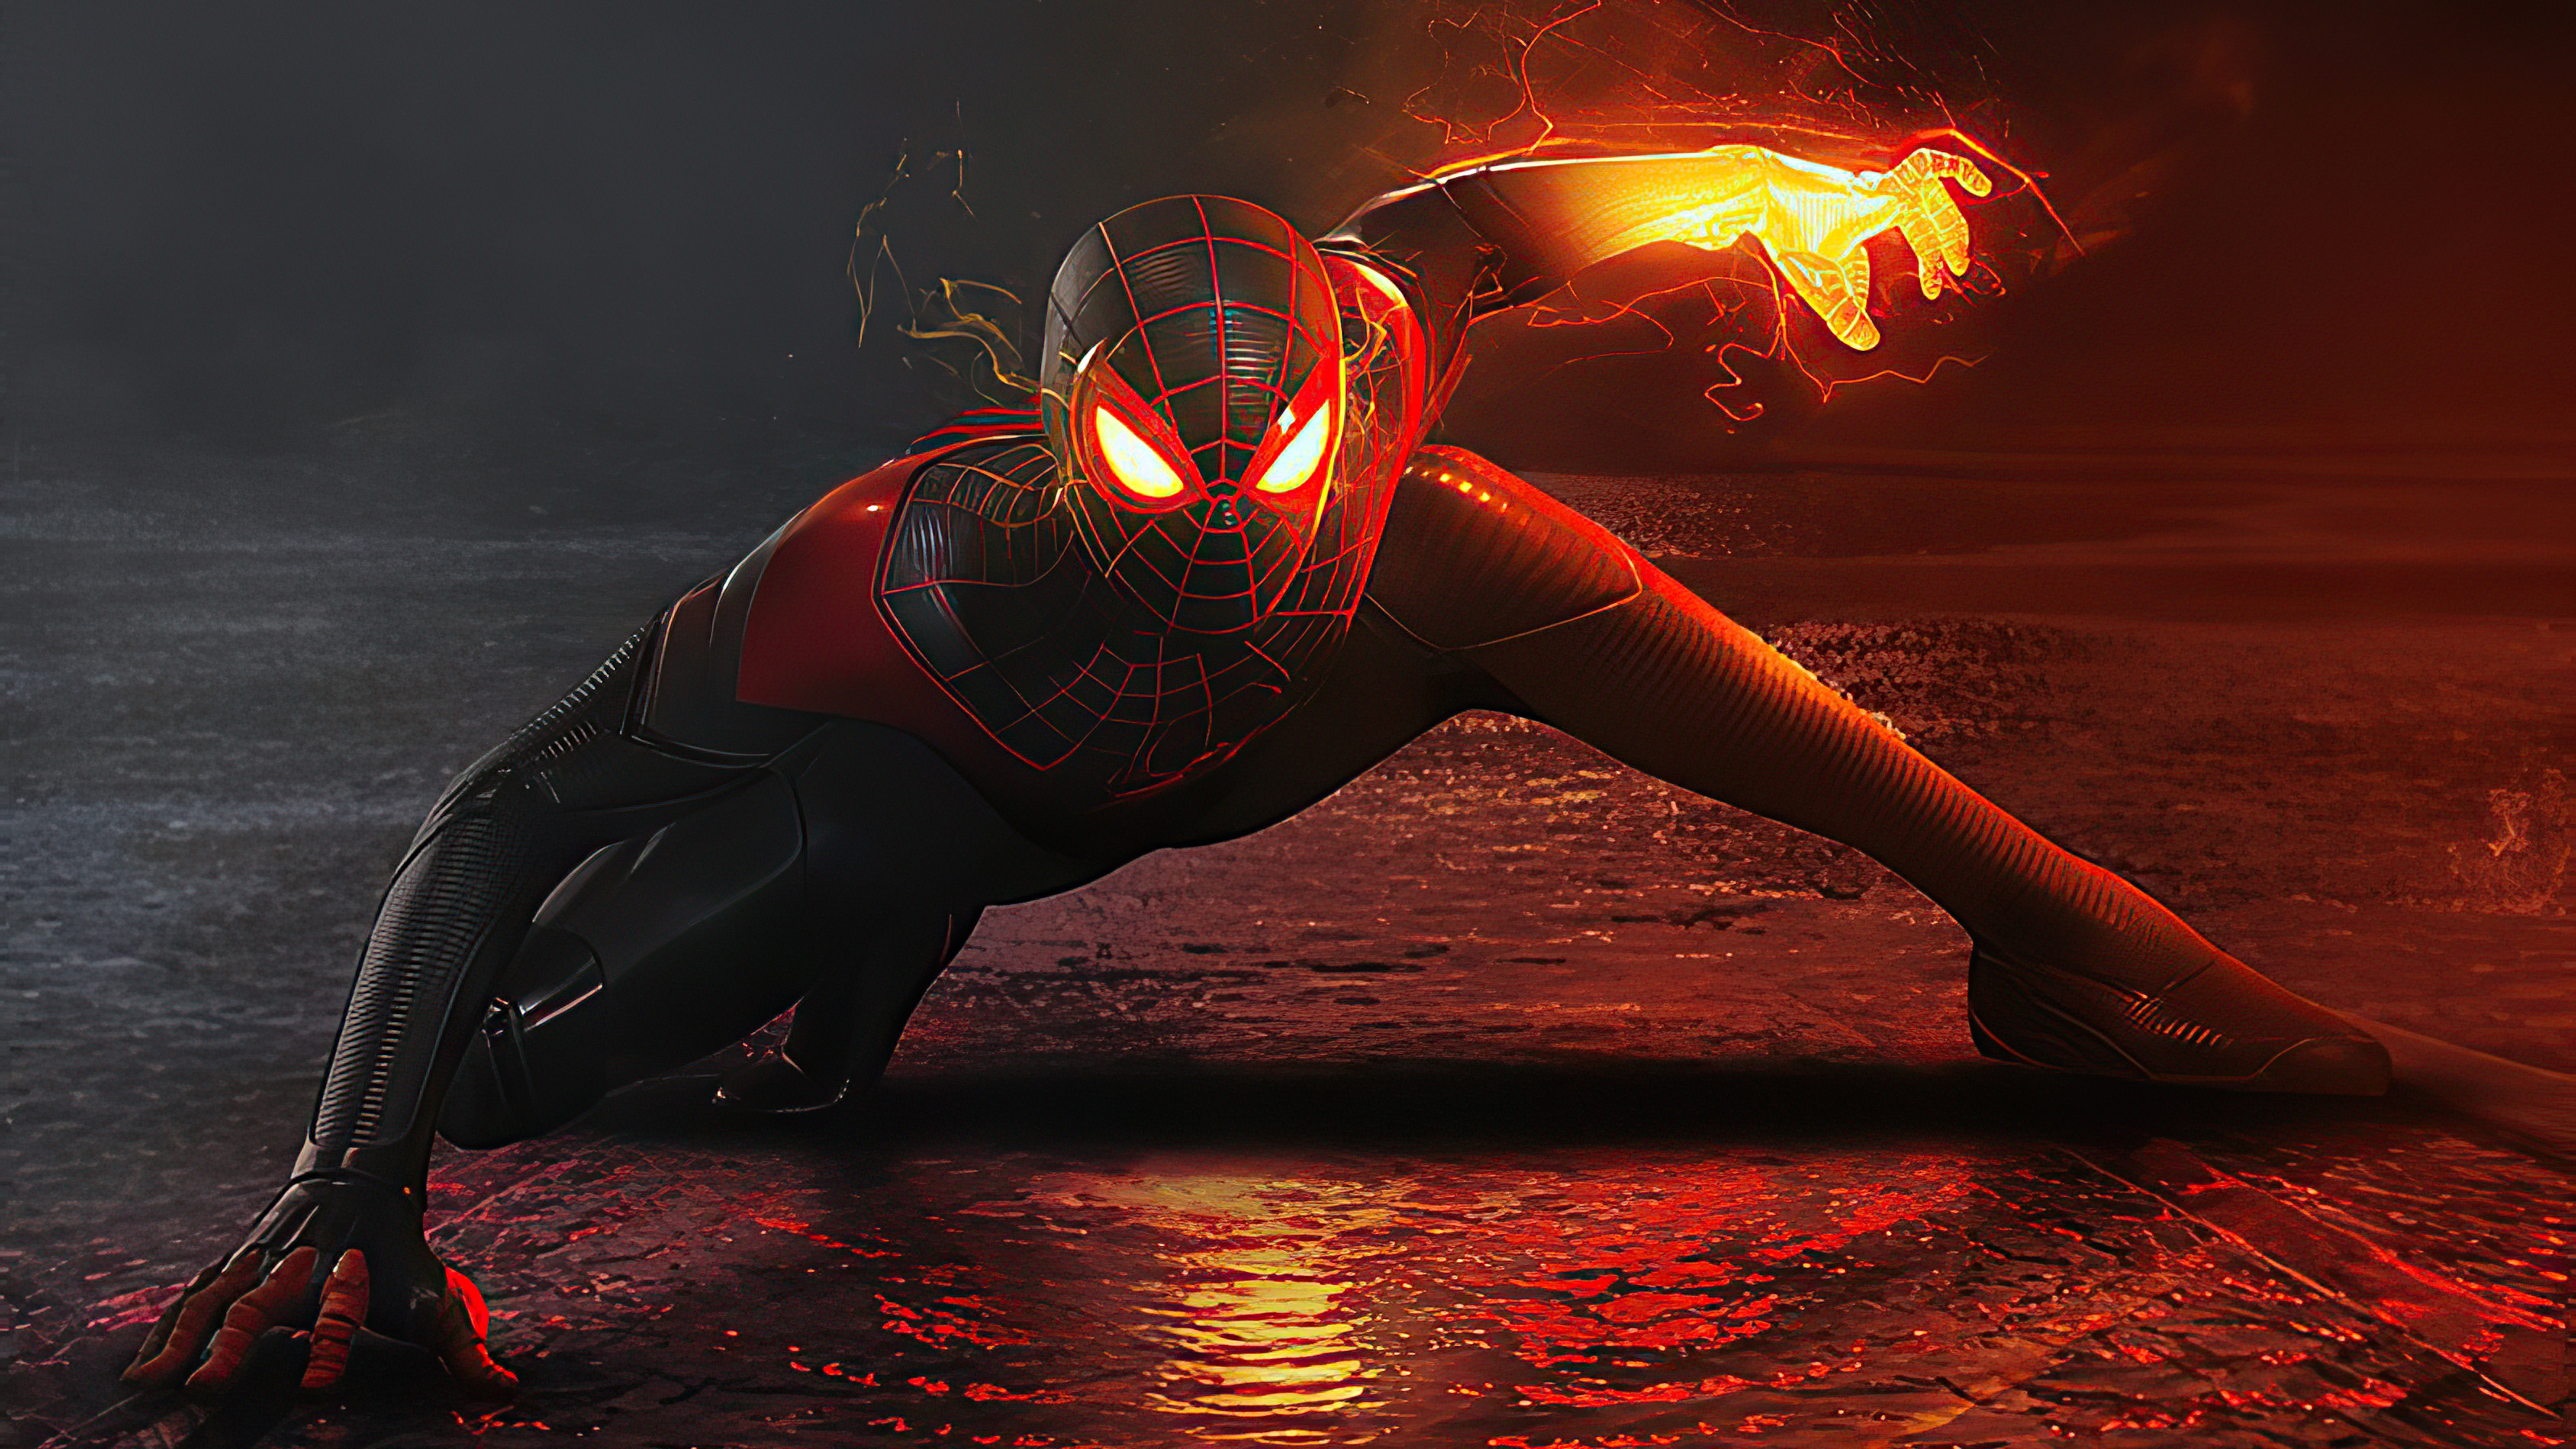 Black Spiderman 4k Artwork 1366x768 Resolution HD 4k Wallpaper, Image, Background, Photo and Picture